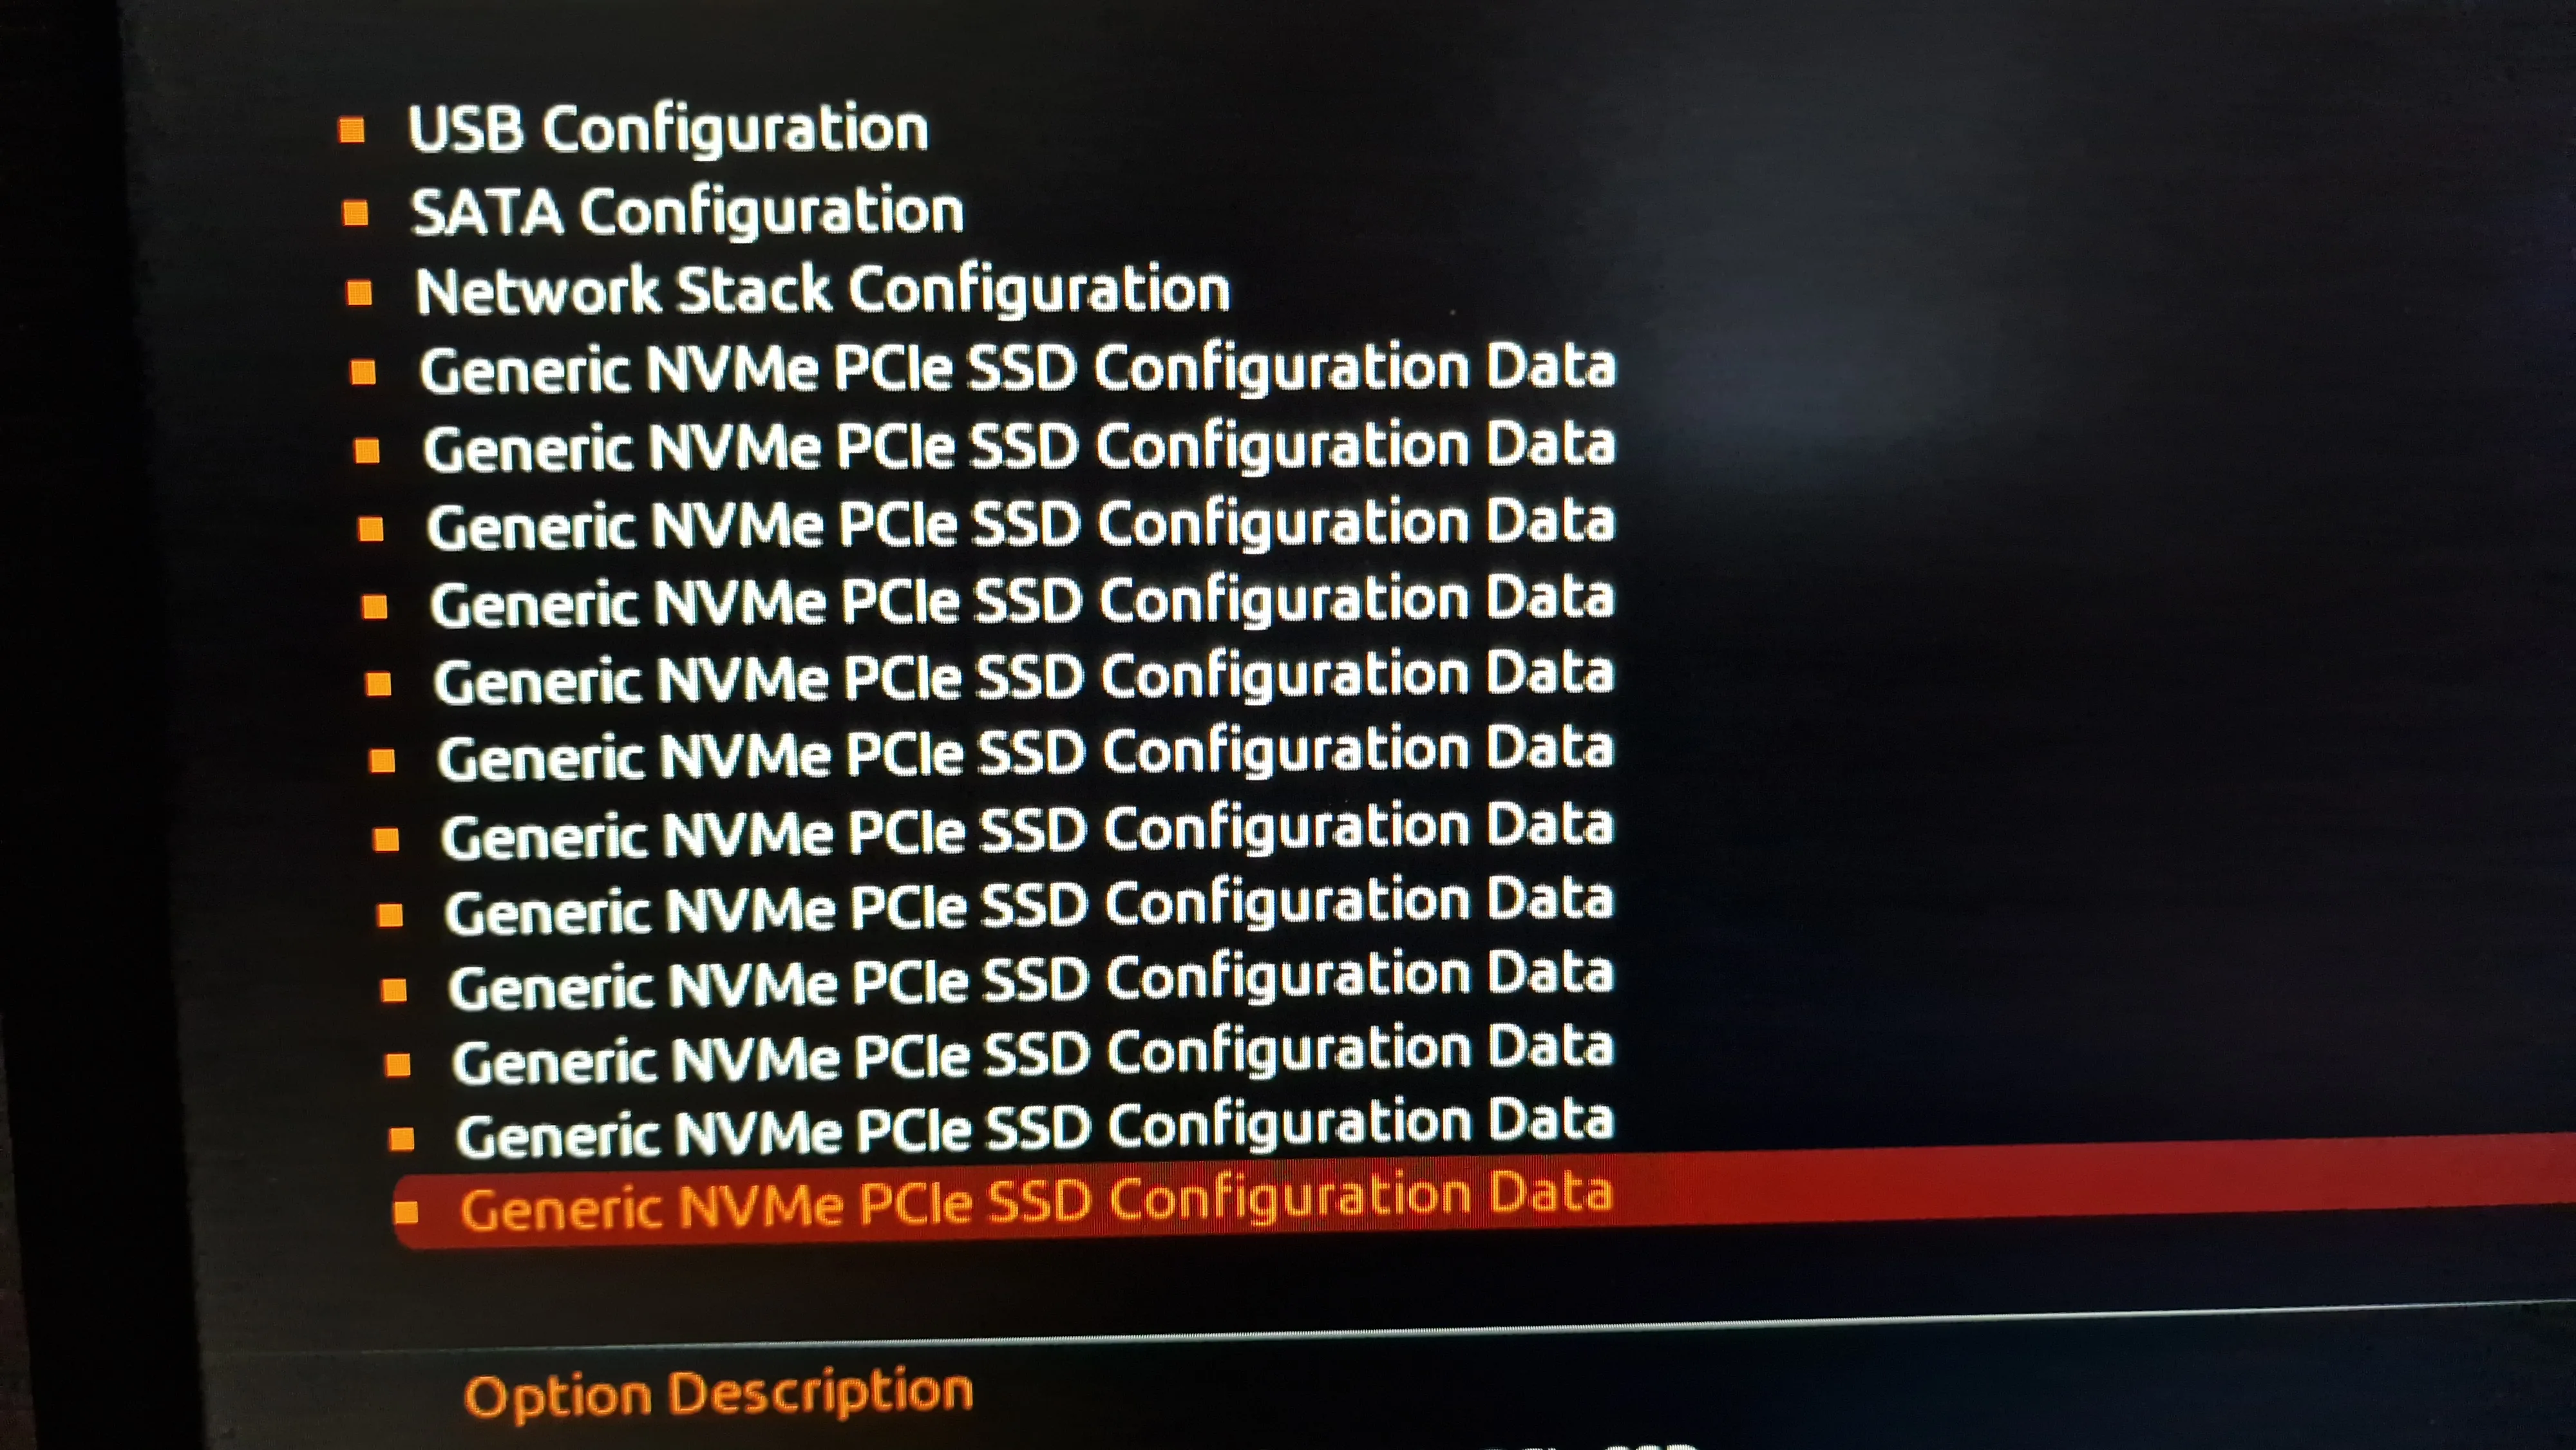 BIOS listing of all 12 SSDs